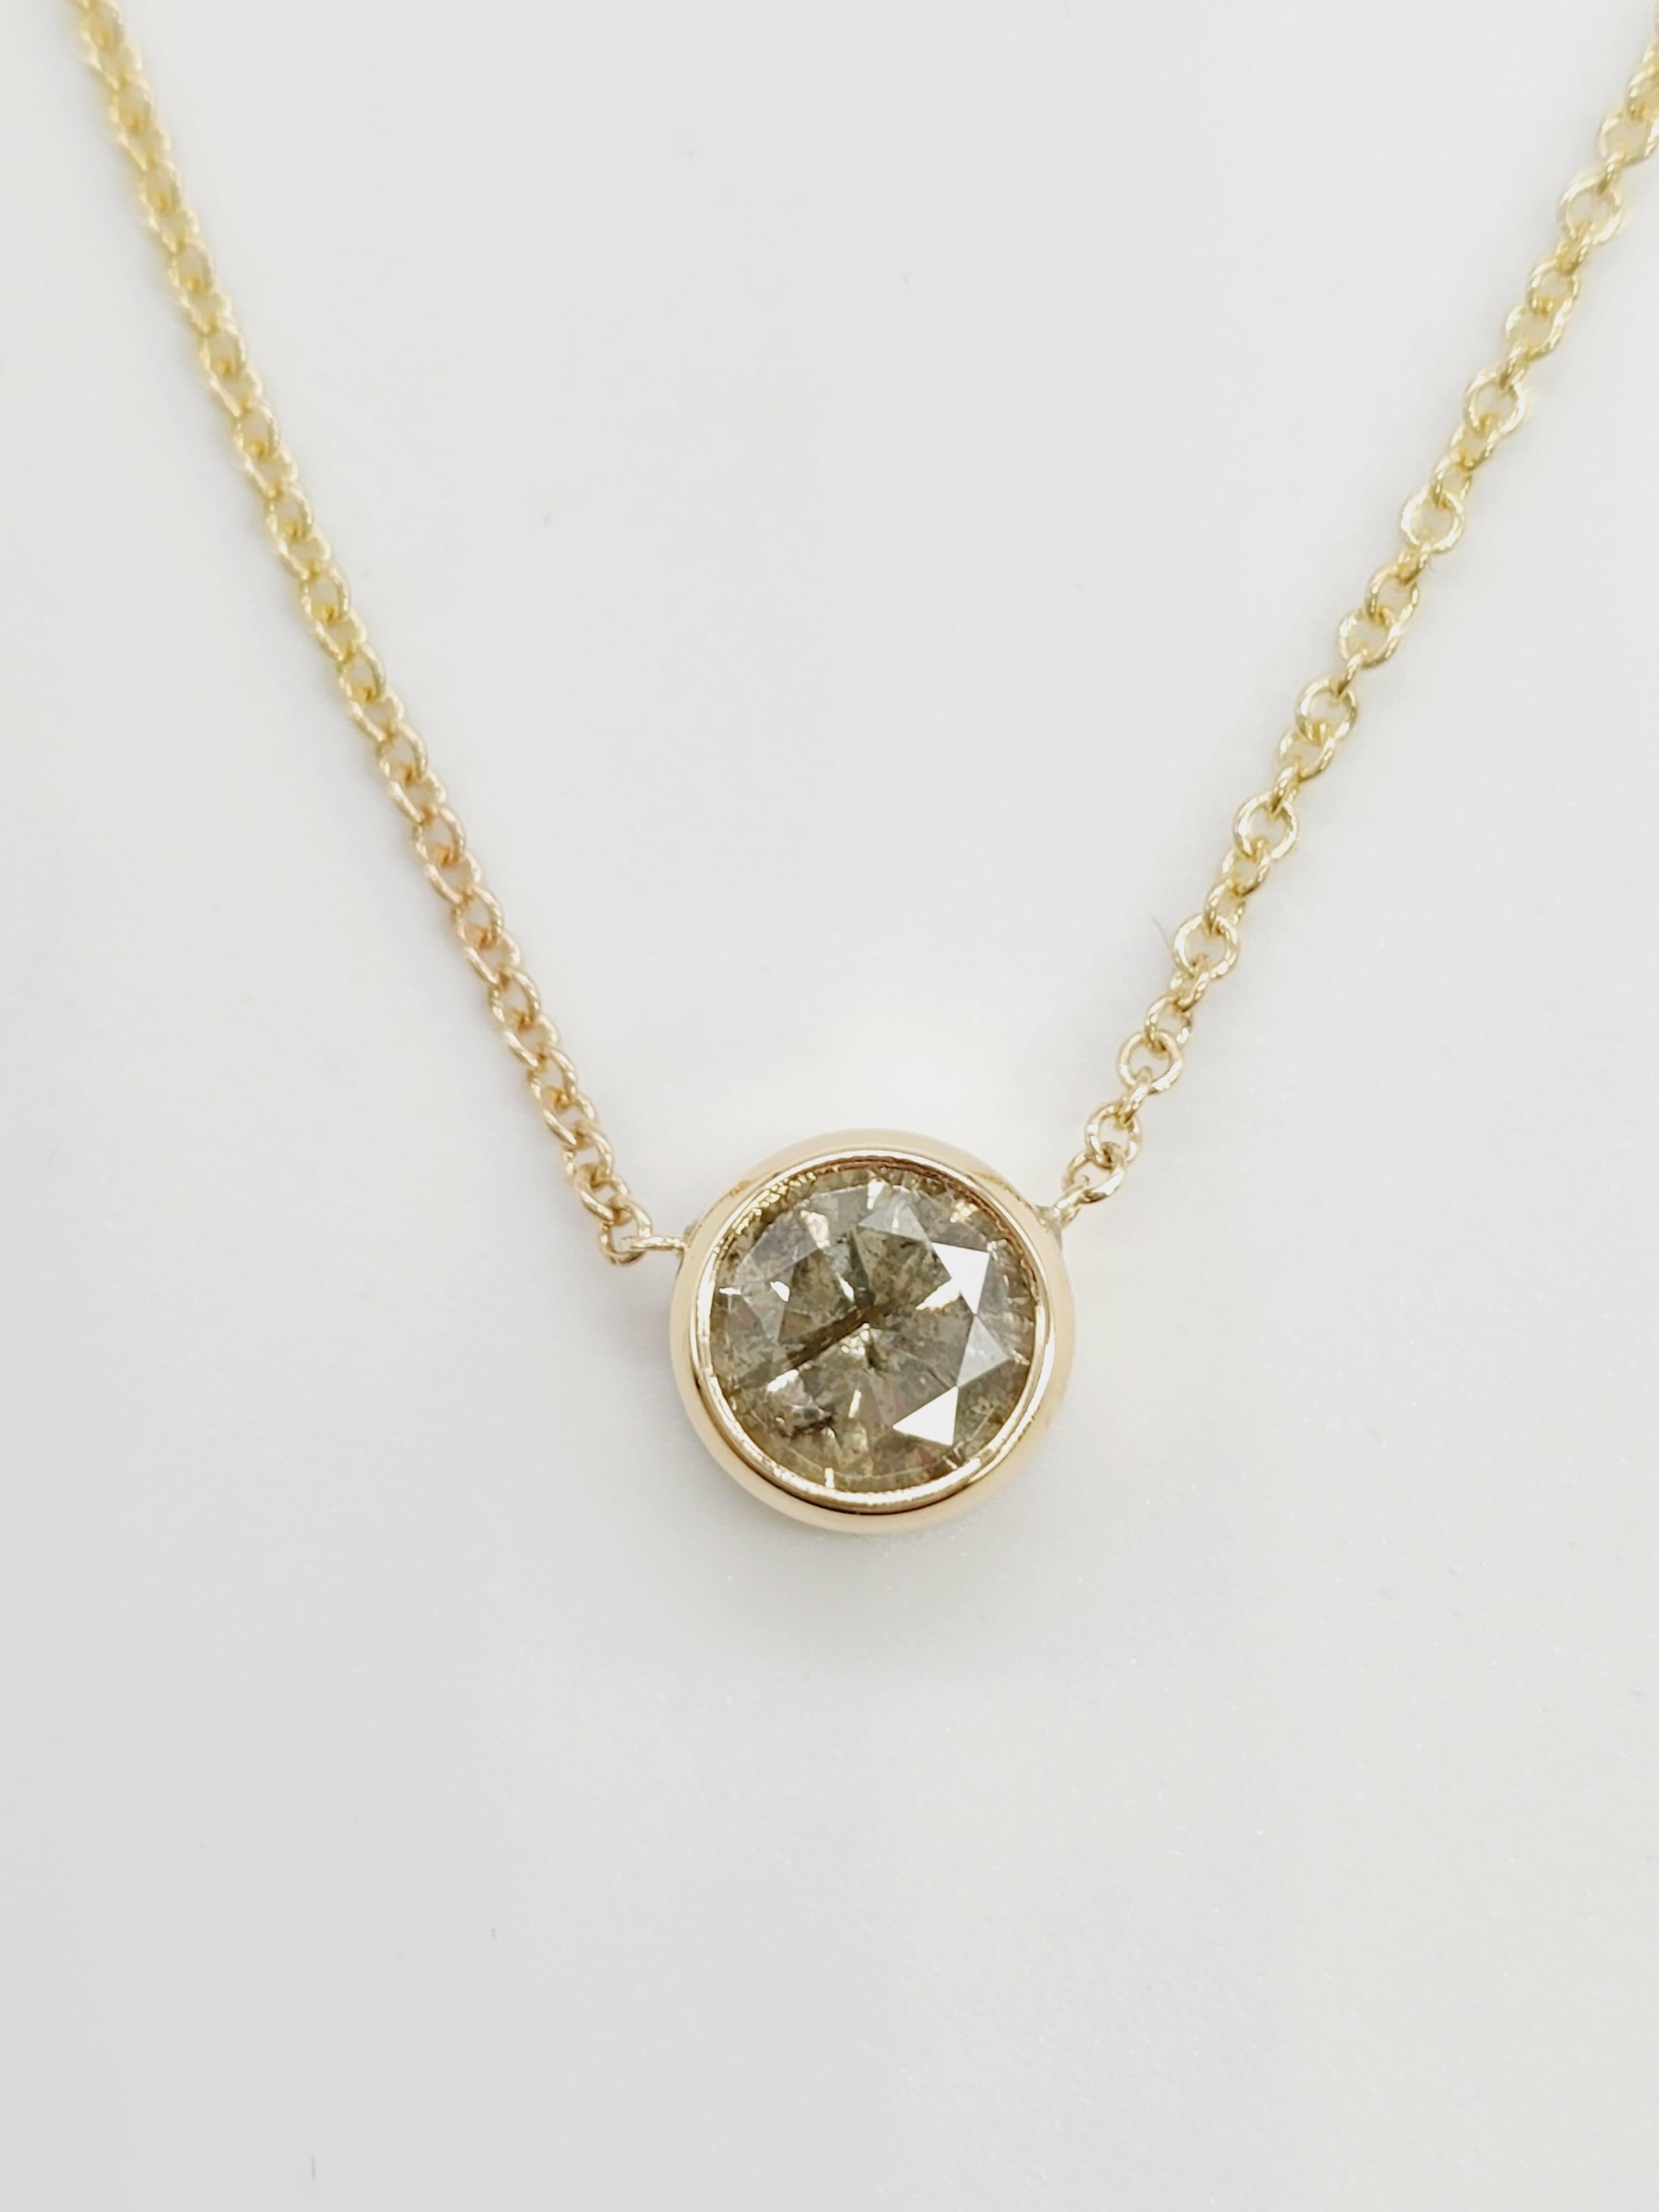 GIA 1.05 Carat Round Fancy Yellow Diamond Pendant 14 Karat Yellow Gold In New Condition For Sale In Great Neck, NY